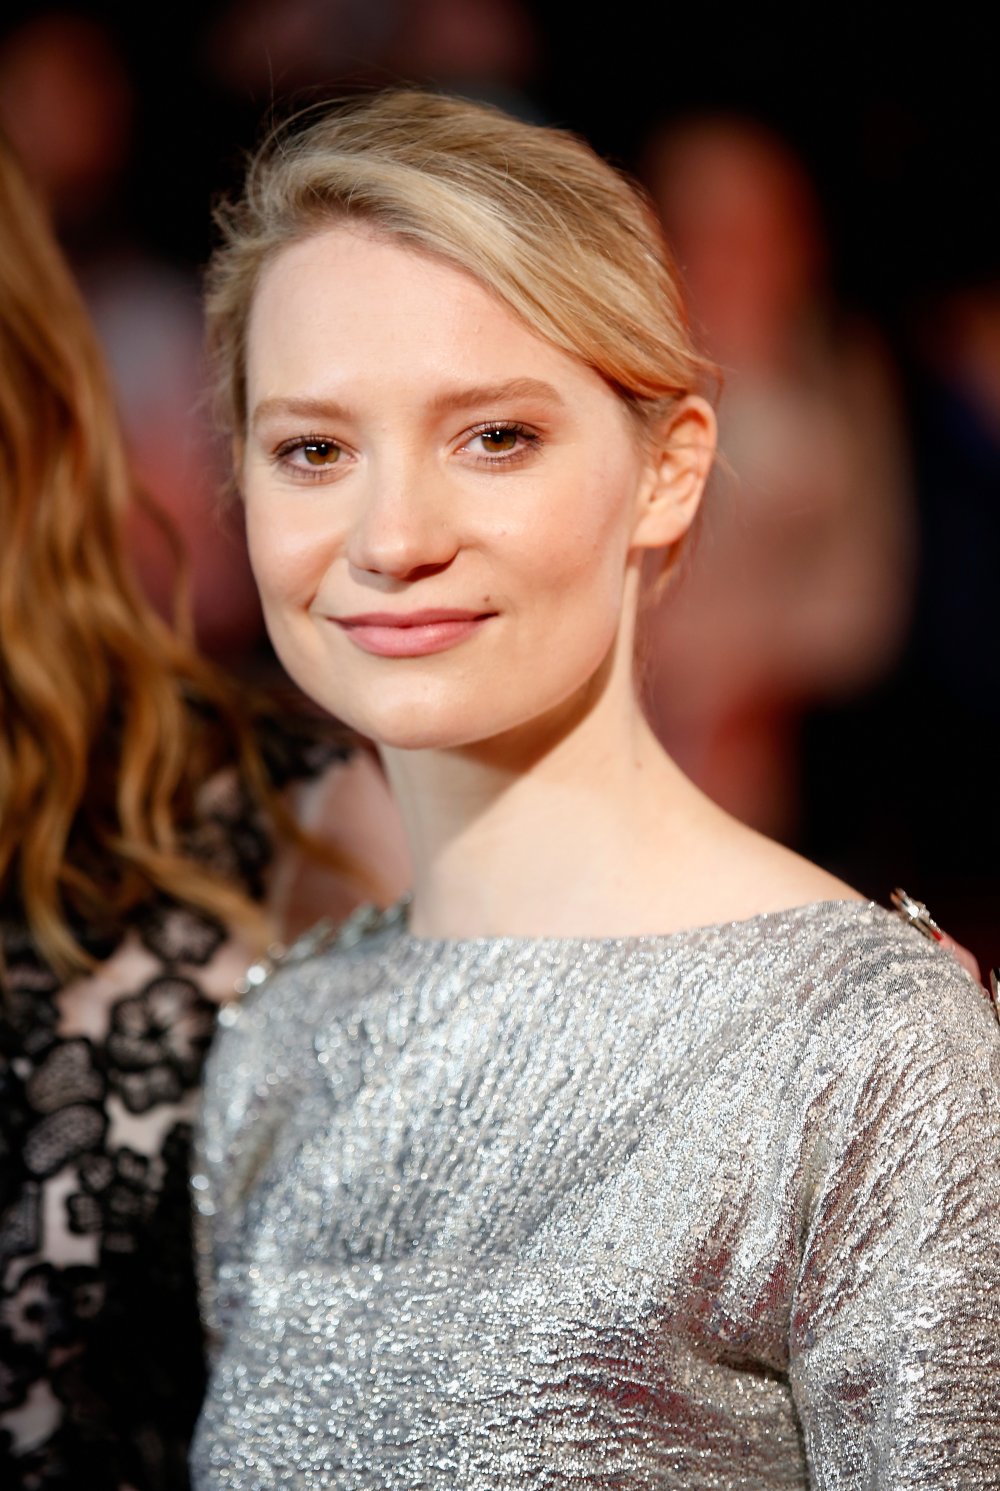 Mia Wasikowska on the red carpet for Madame Bovary at the 58th BFI London Film Festival